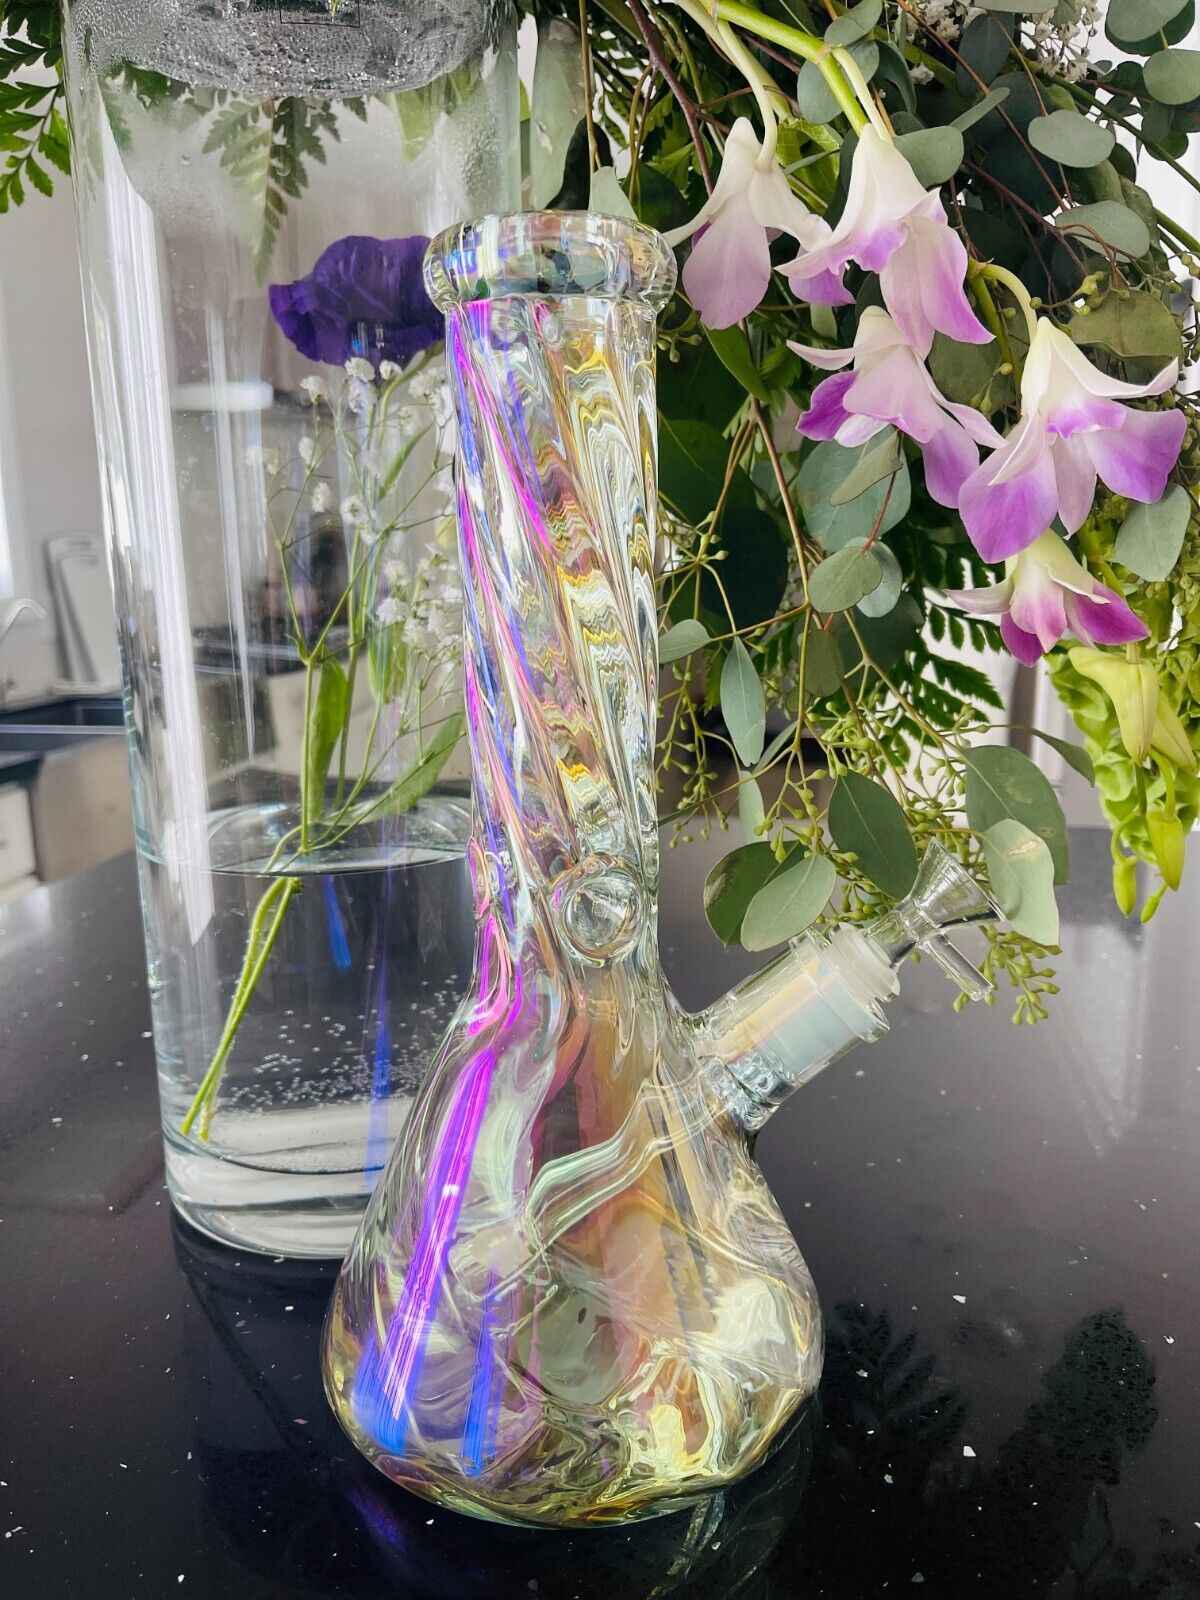 12 Inch Thick-7mm Iridescent Beaker Heavy Glass Water Filter Bong Spiral. Available Now for 55.00